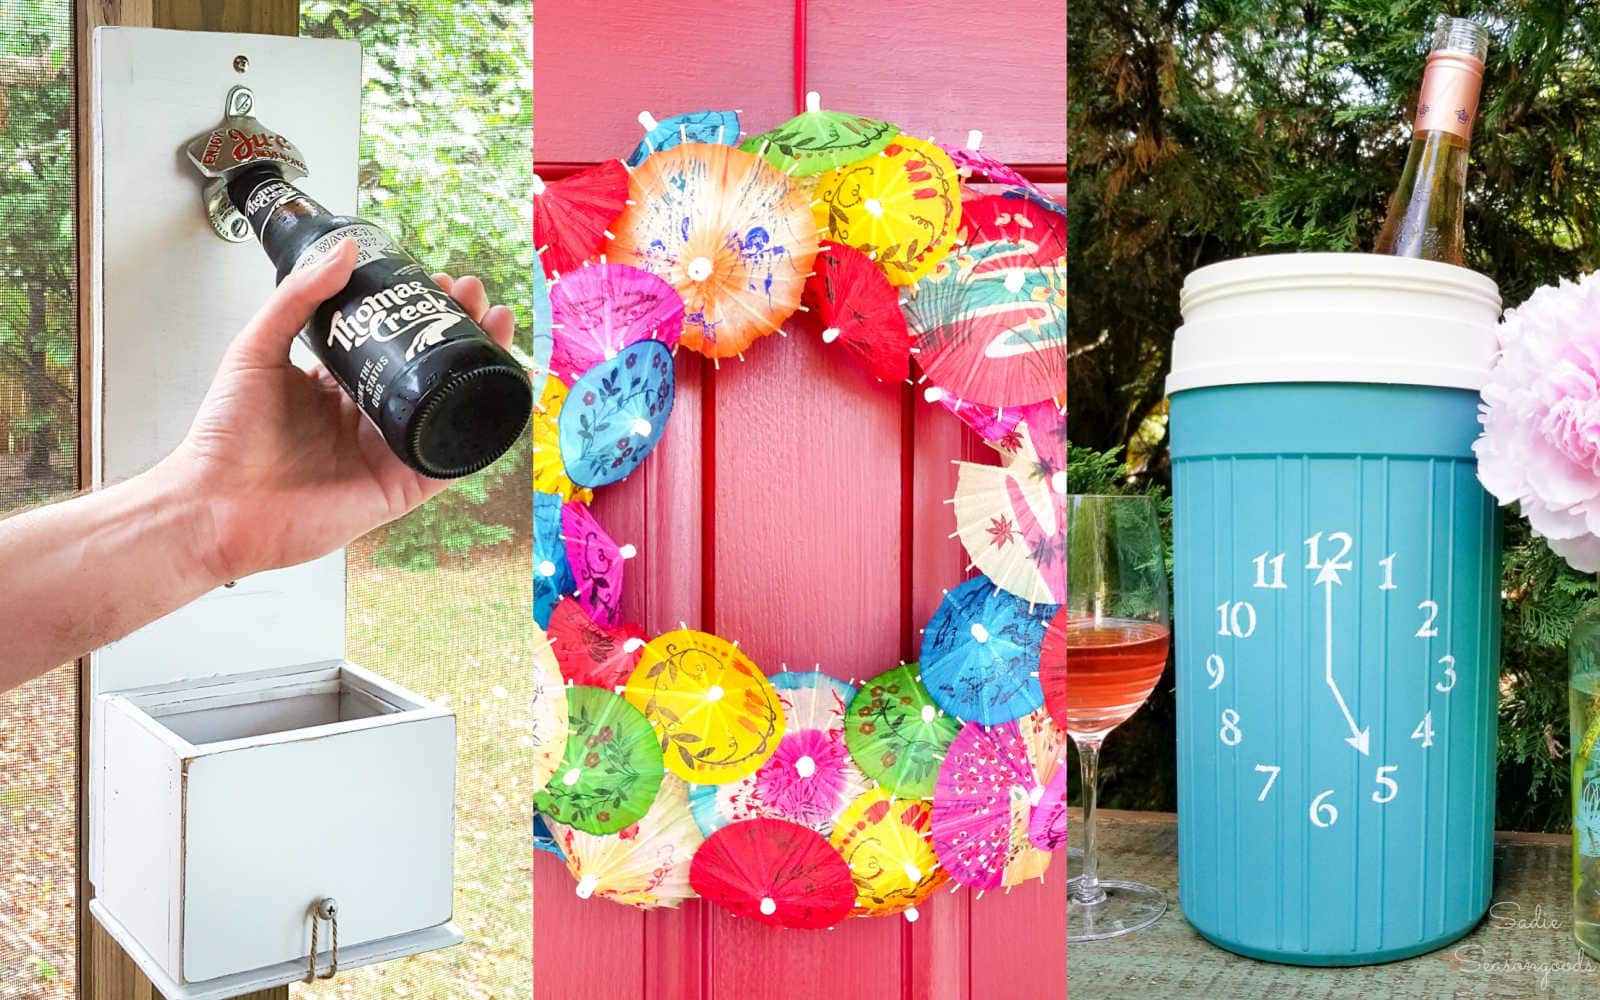 diy ideas and other summer crafts